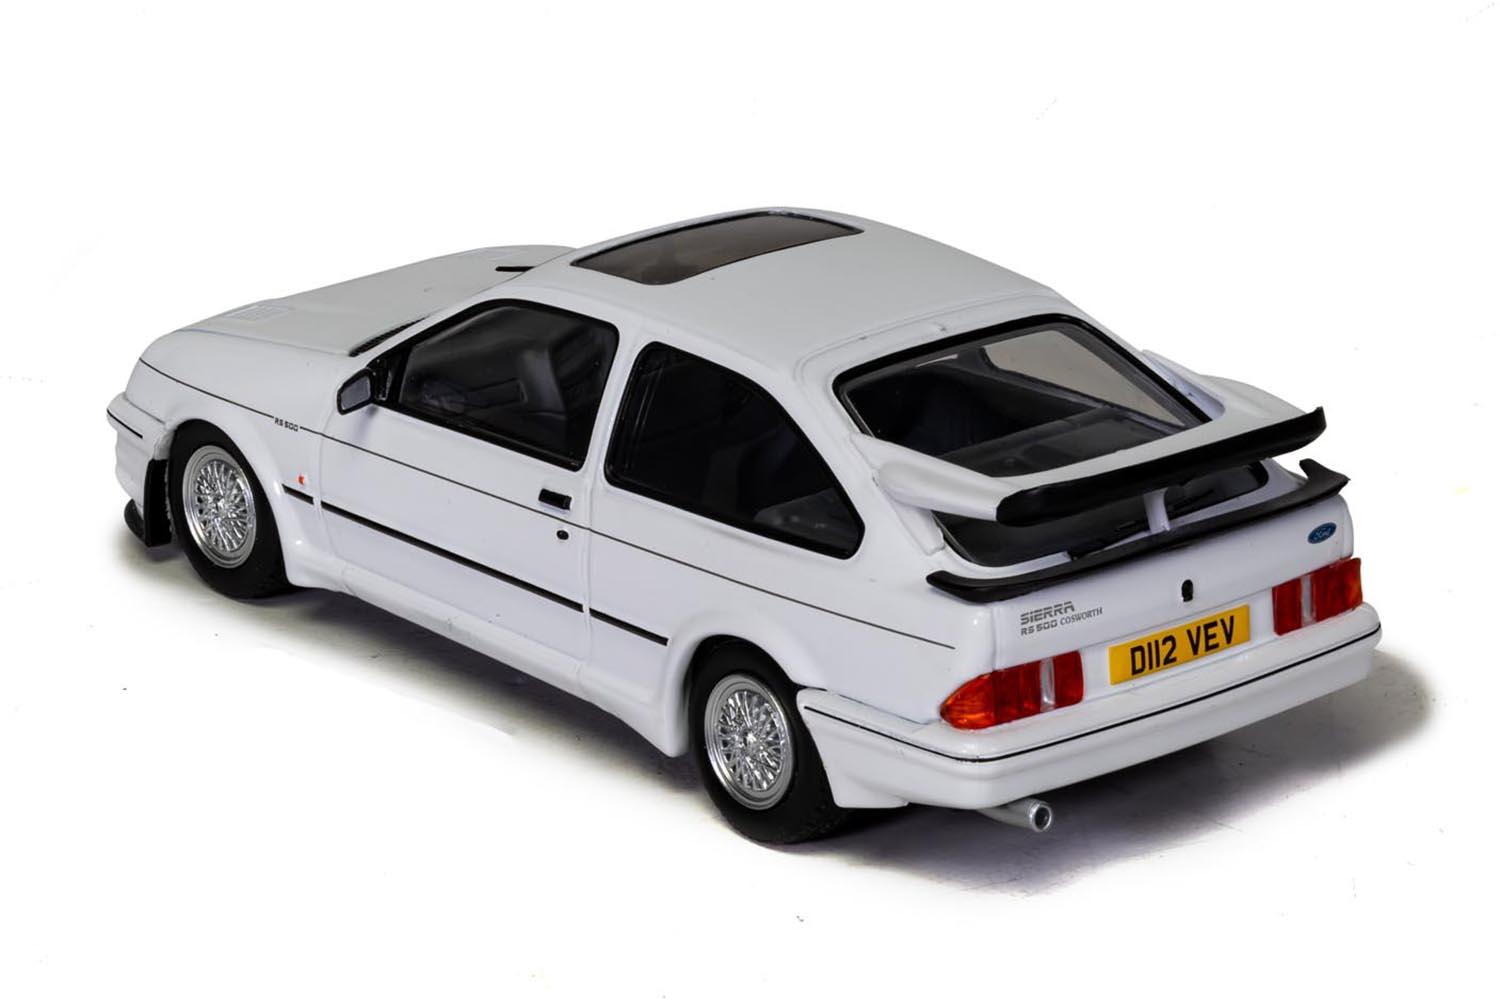 The RS500 model shown here is chassis number one, first prototype built and the only one of the four pre-production RS500 built by Ford themselves rather than Aston Martin.